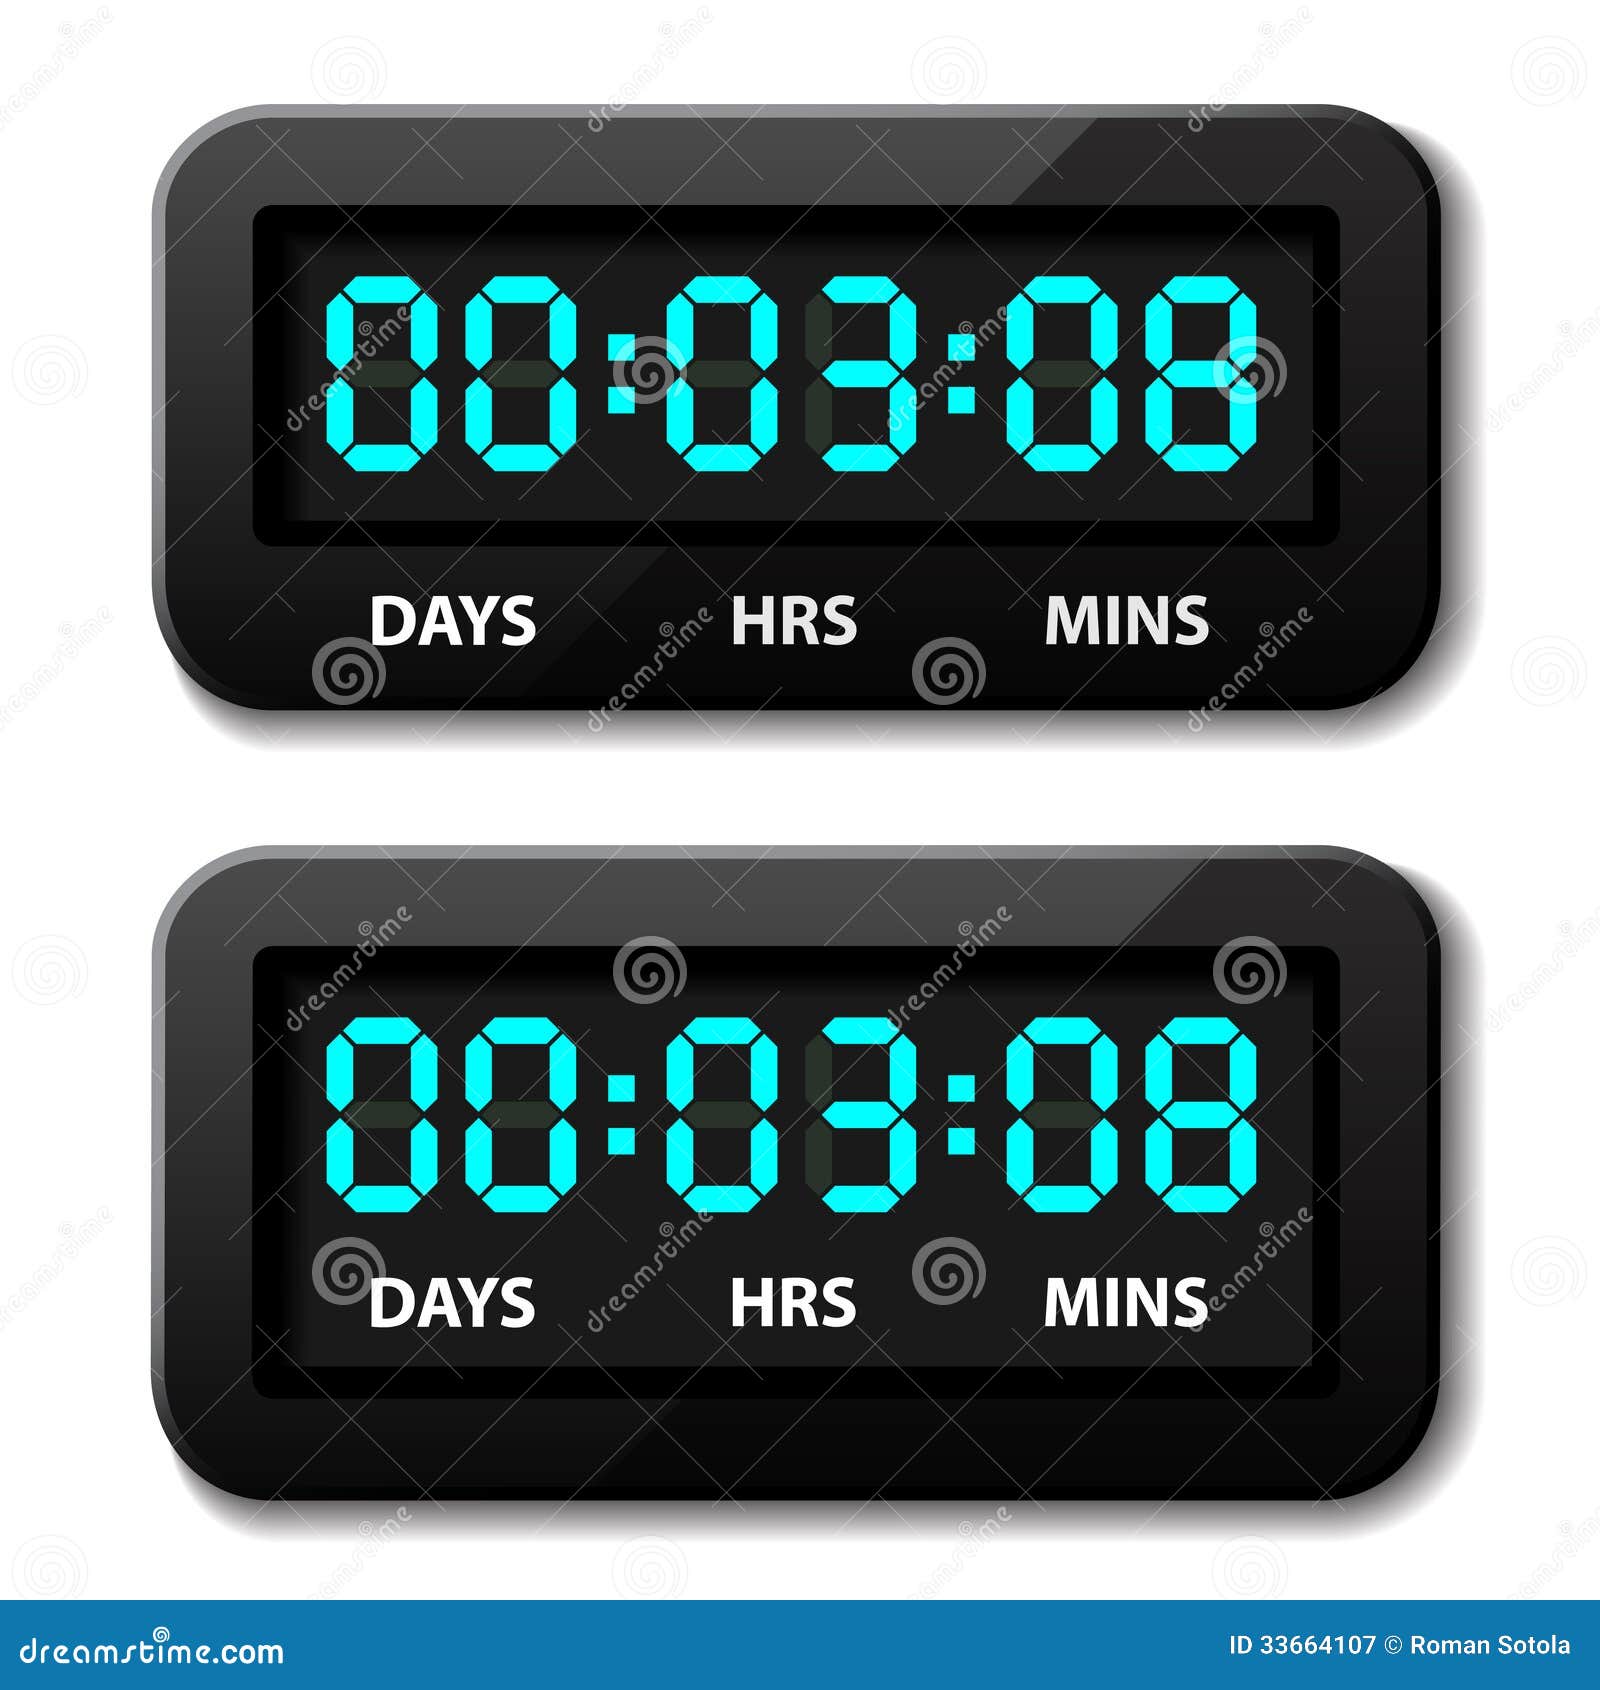 Glowing Digital Counter - Countdown Timer Royalty Free Stock Photography - Image: 336641071300 x 1390